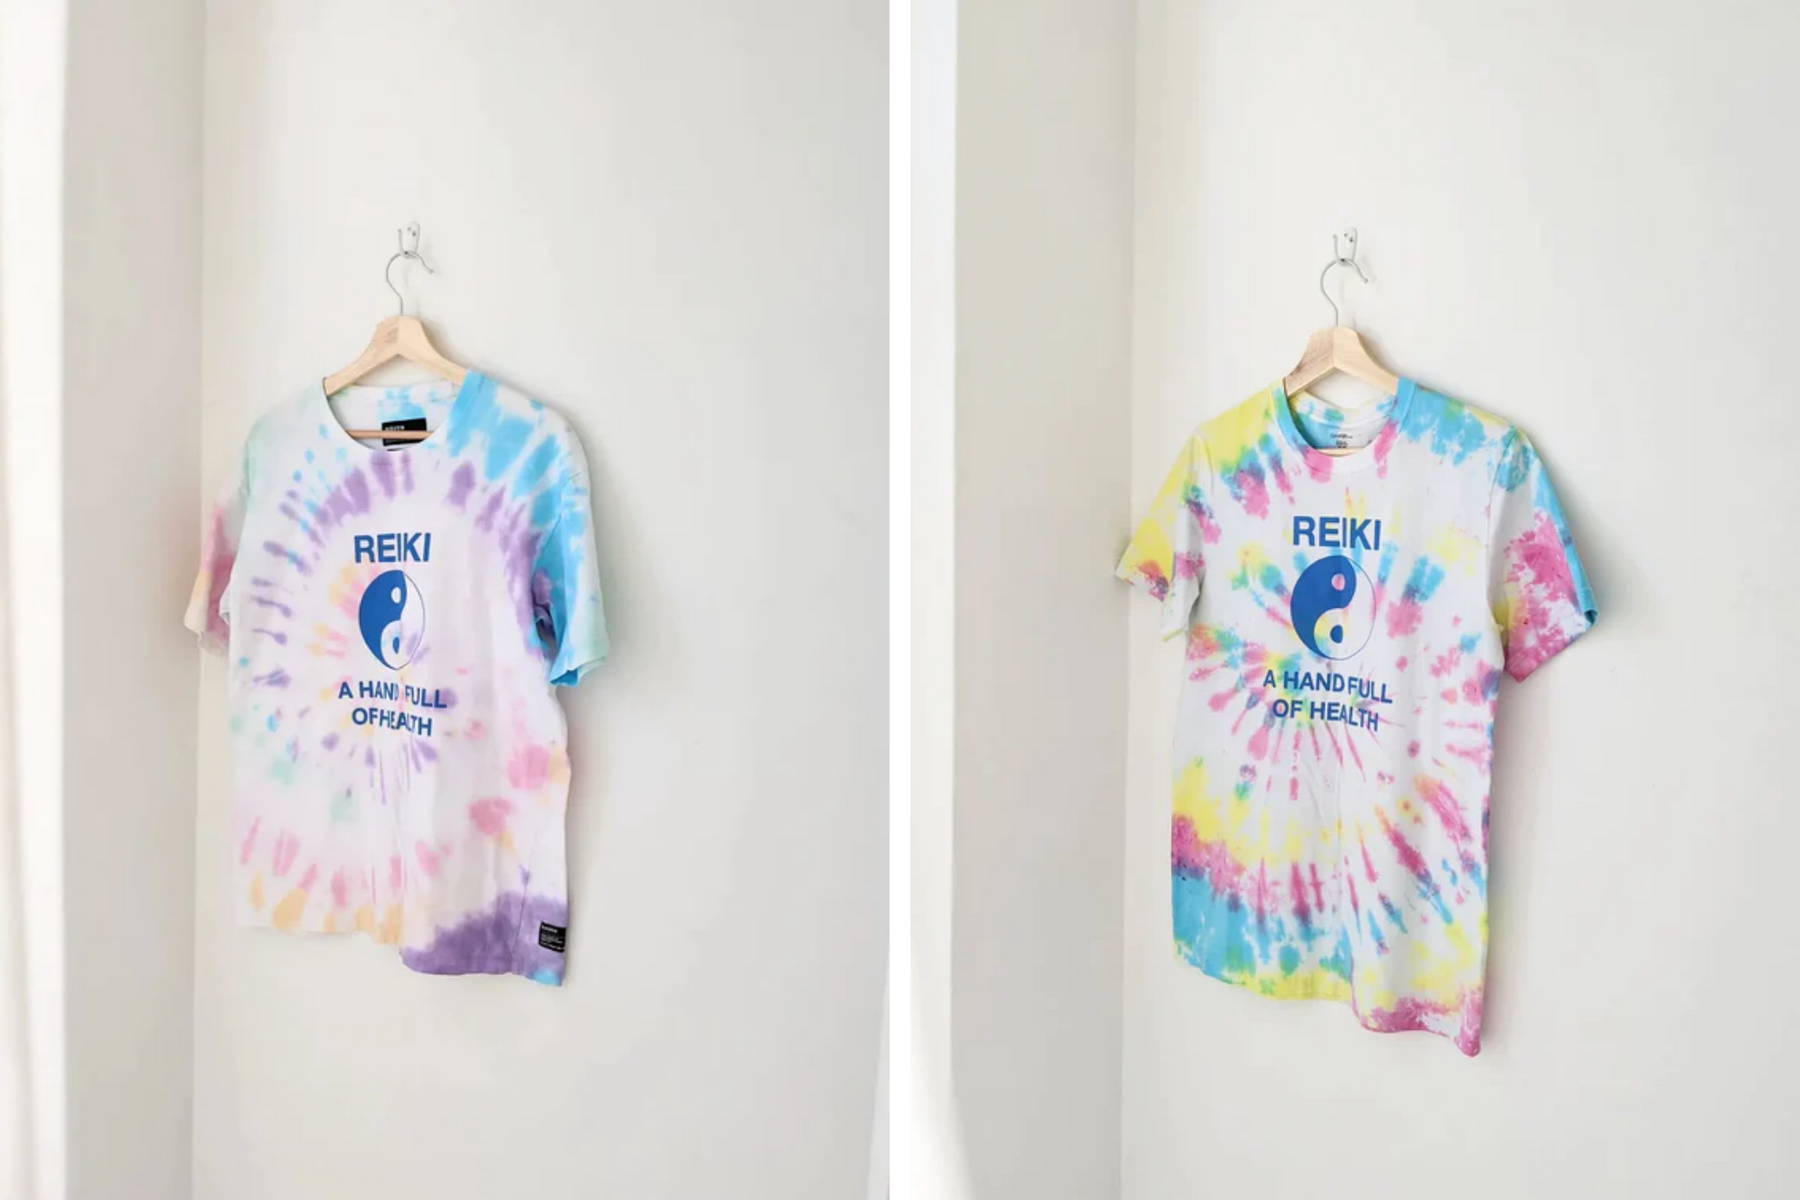 HOTHAMS x Collective Will Collaboration T-Shirts